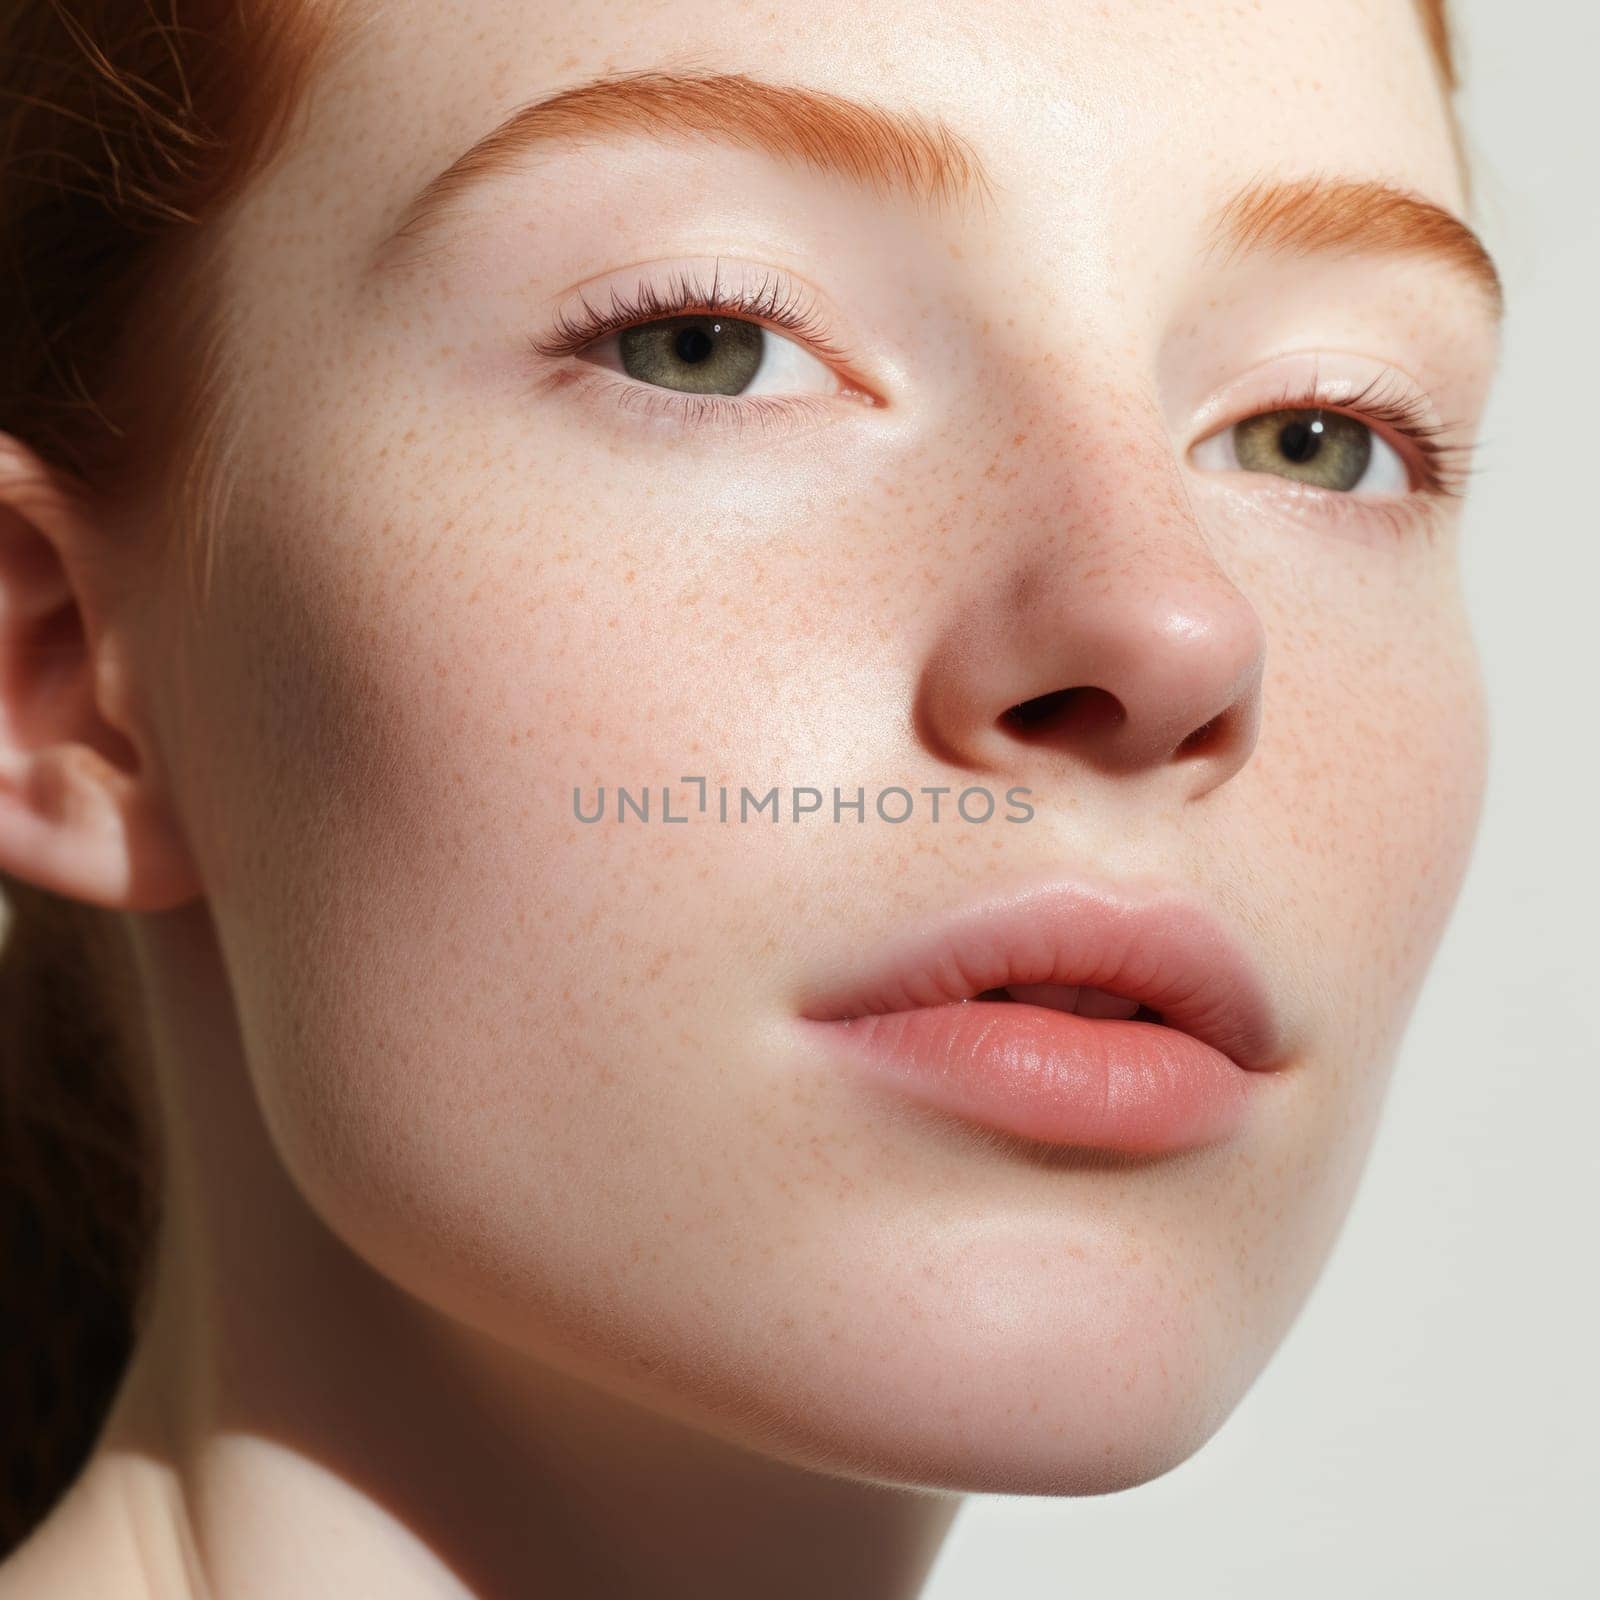 A close up of a woman with freckled skin